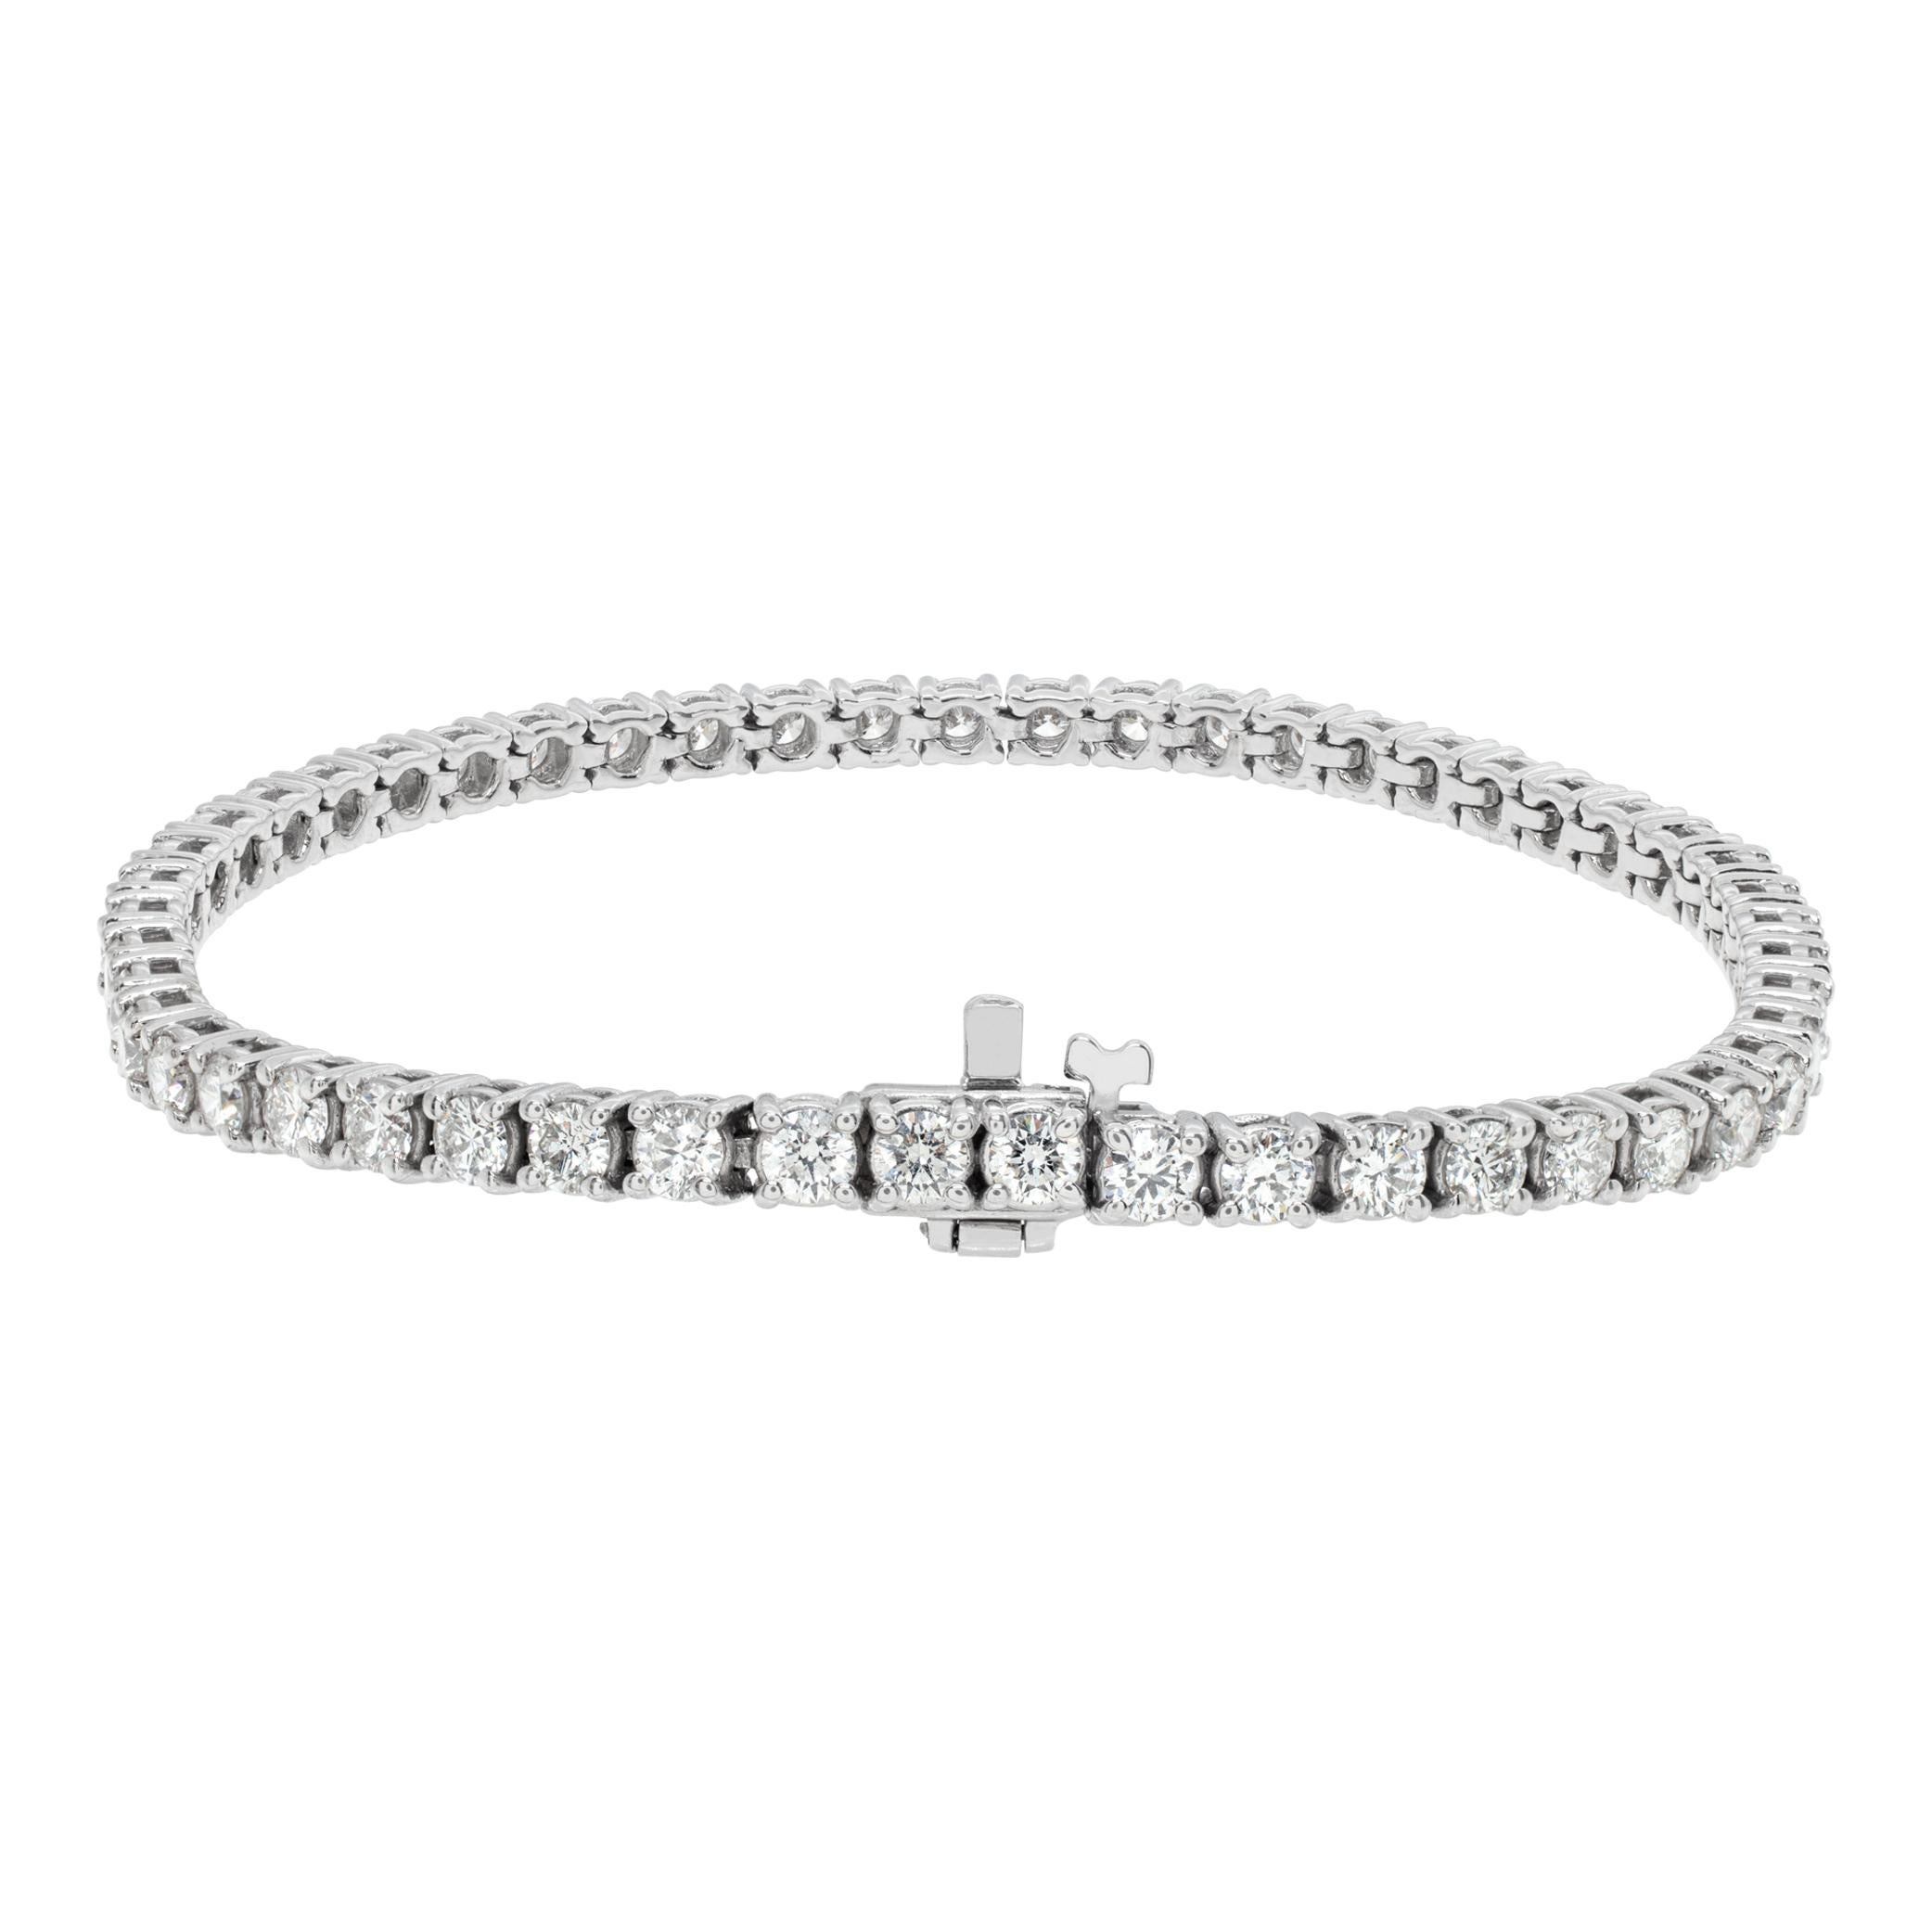 Divine 18k white gold diamond tennis bracelet with 4.95 carats in round brilliant cut diamonds (G-H Color, VS Clarity), length 7.25 inches.
